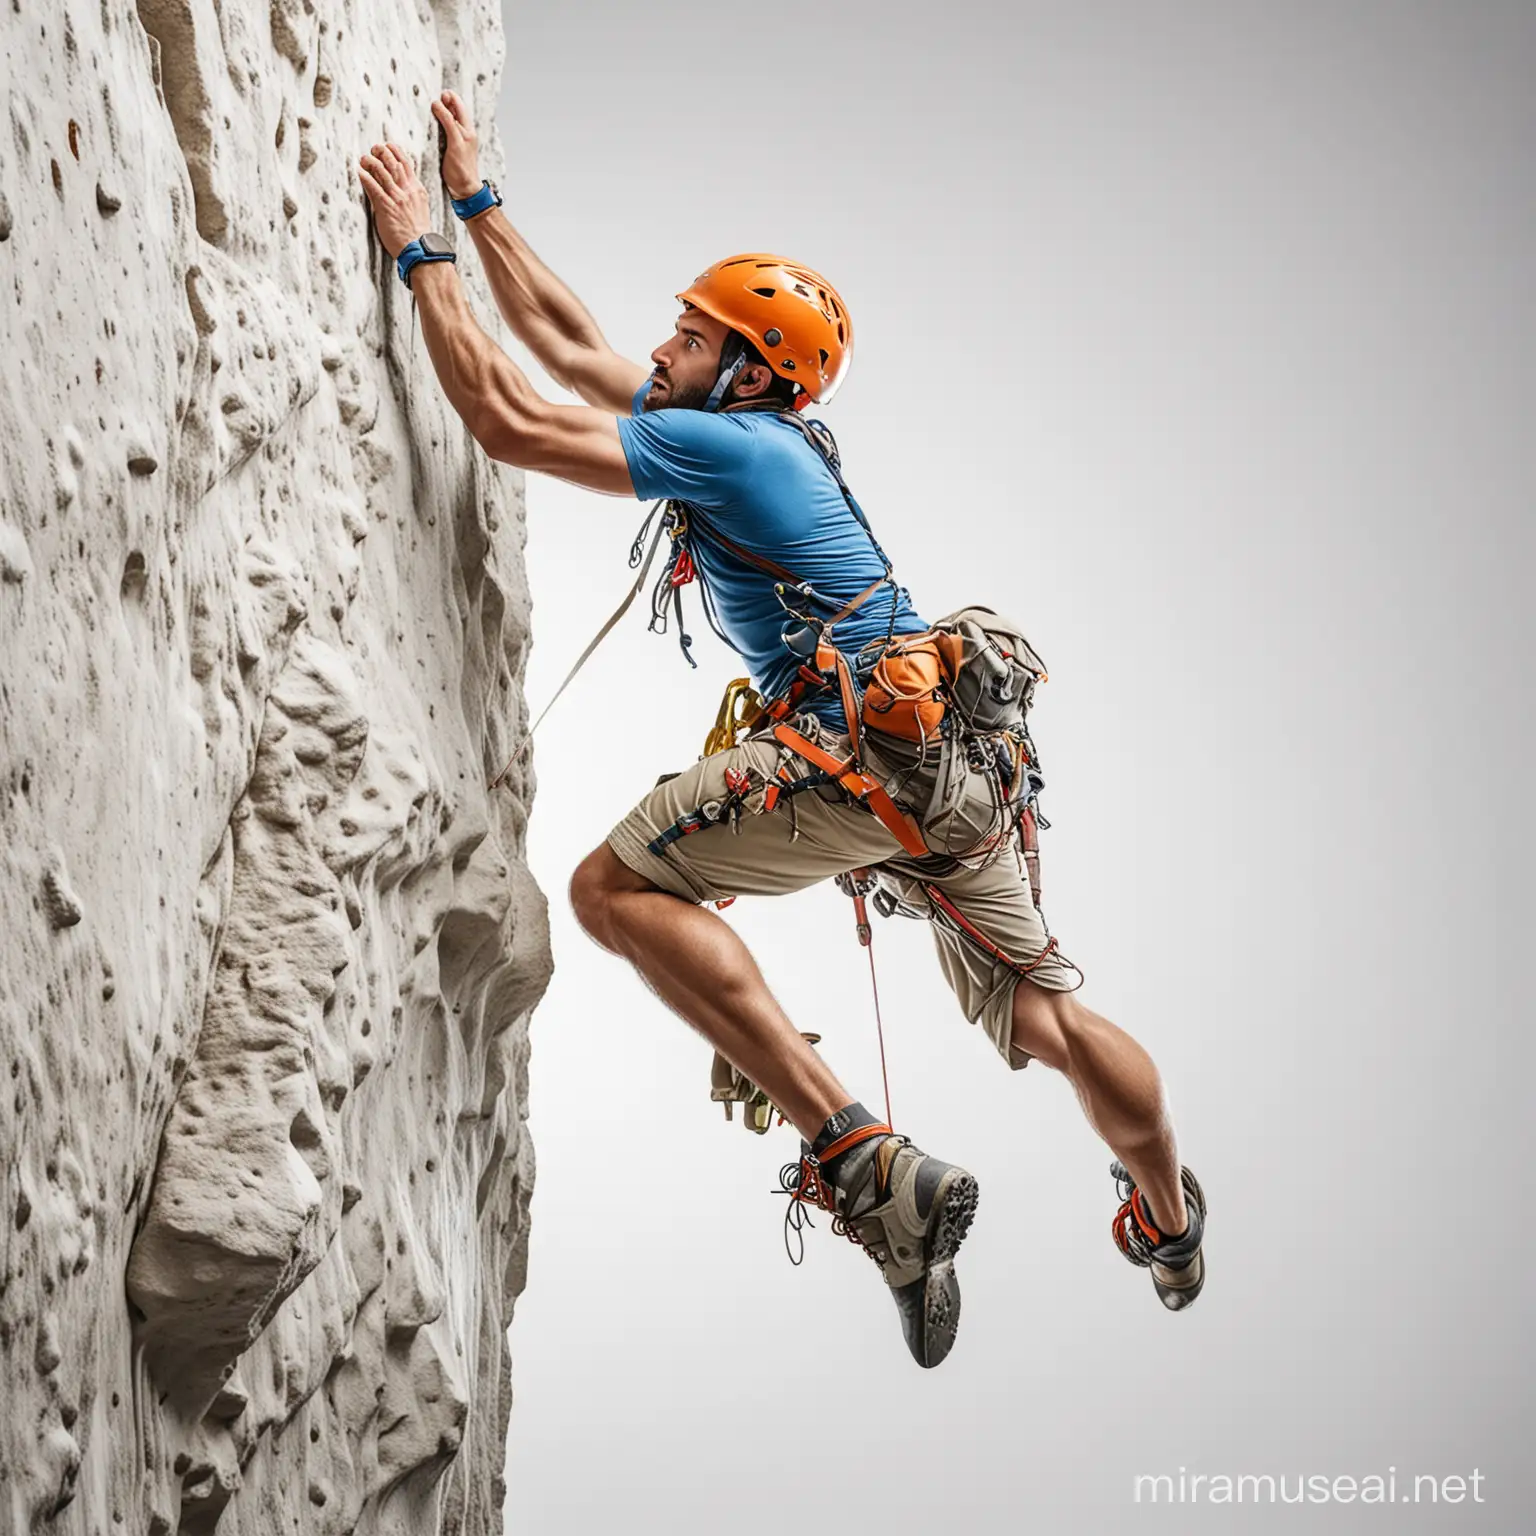 Ambitious Climber Scaling Challenging Terrain Against a Bright White Background